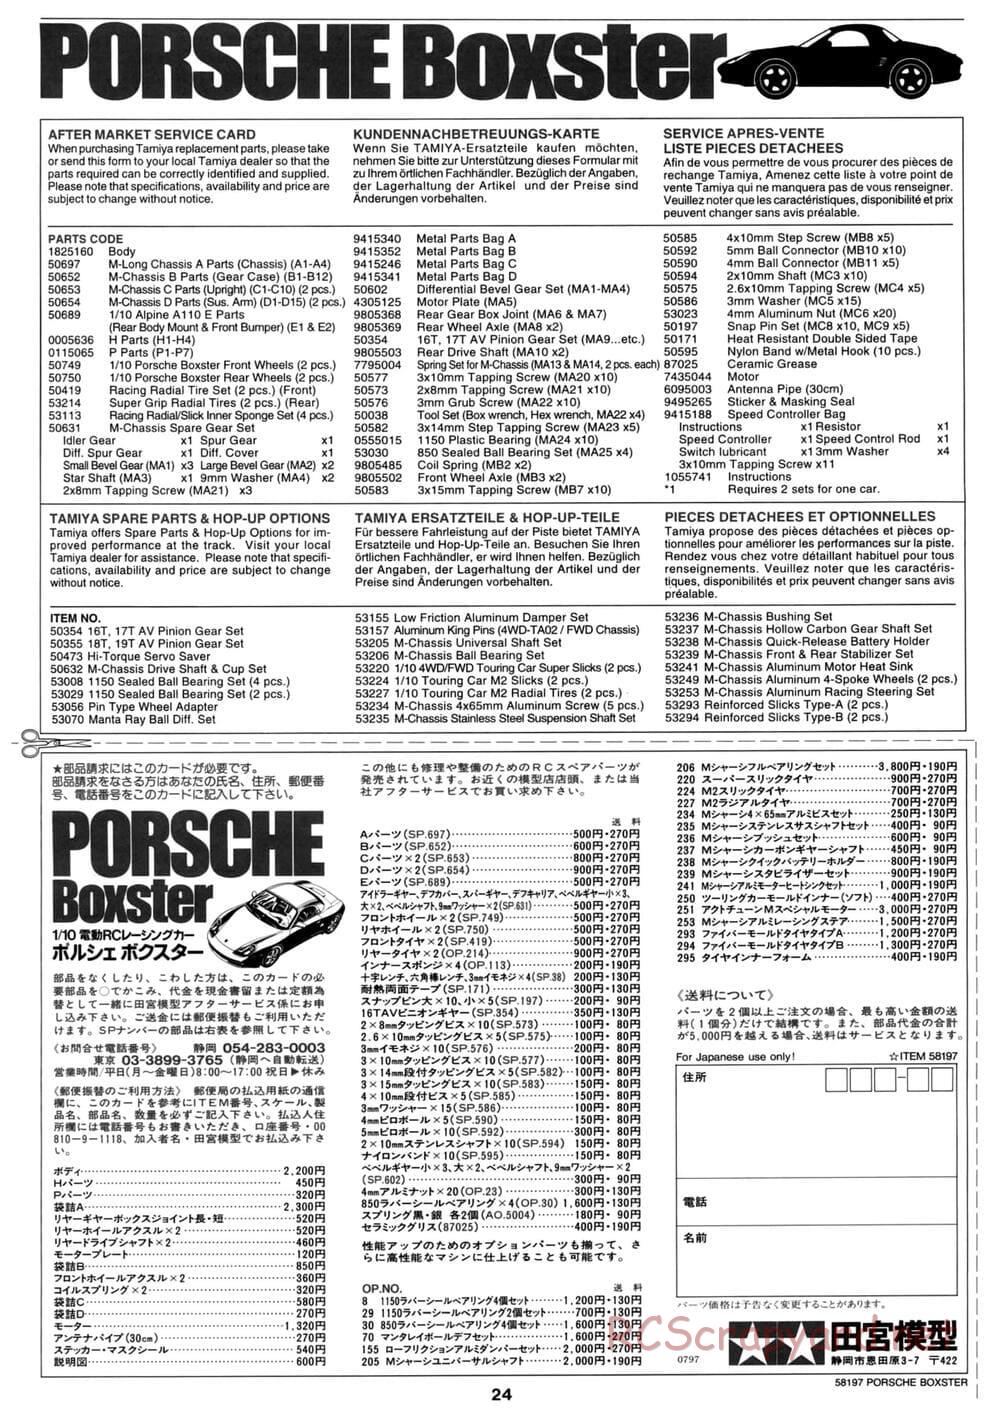 Tamiya - Porsche Boxster - M02L Chassis - Manual - Page 24